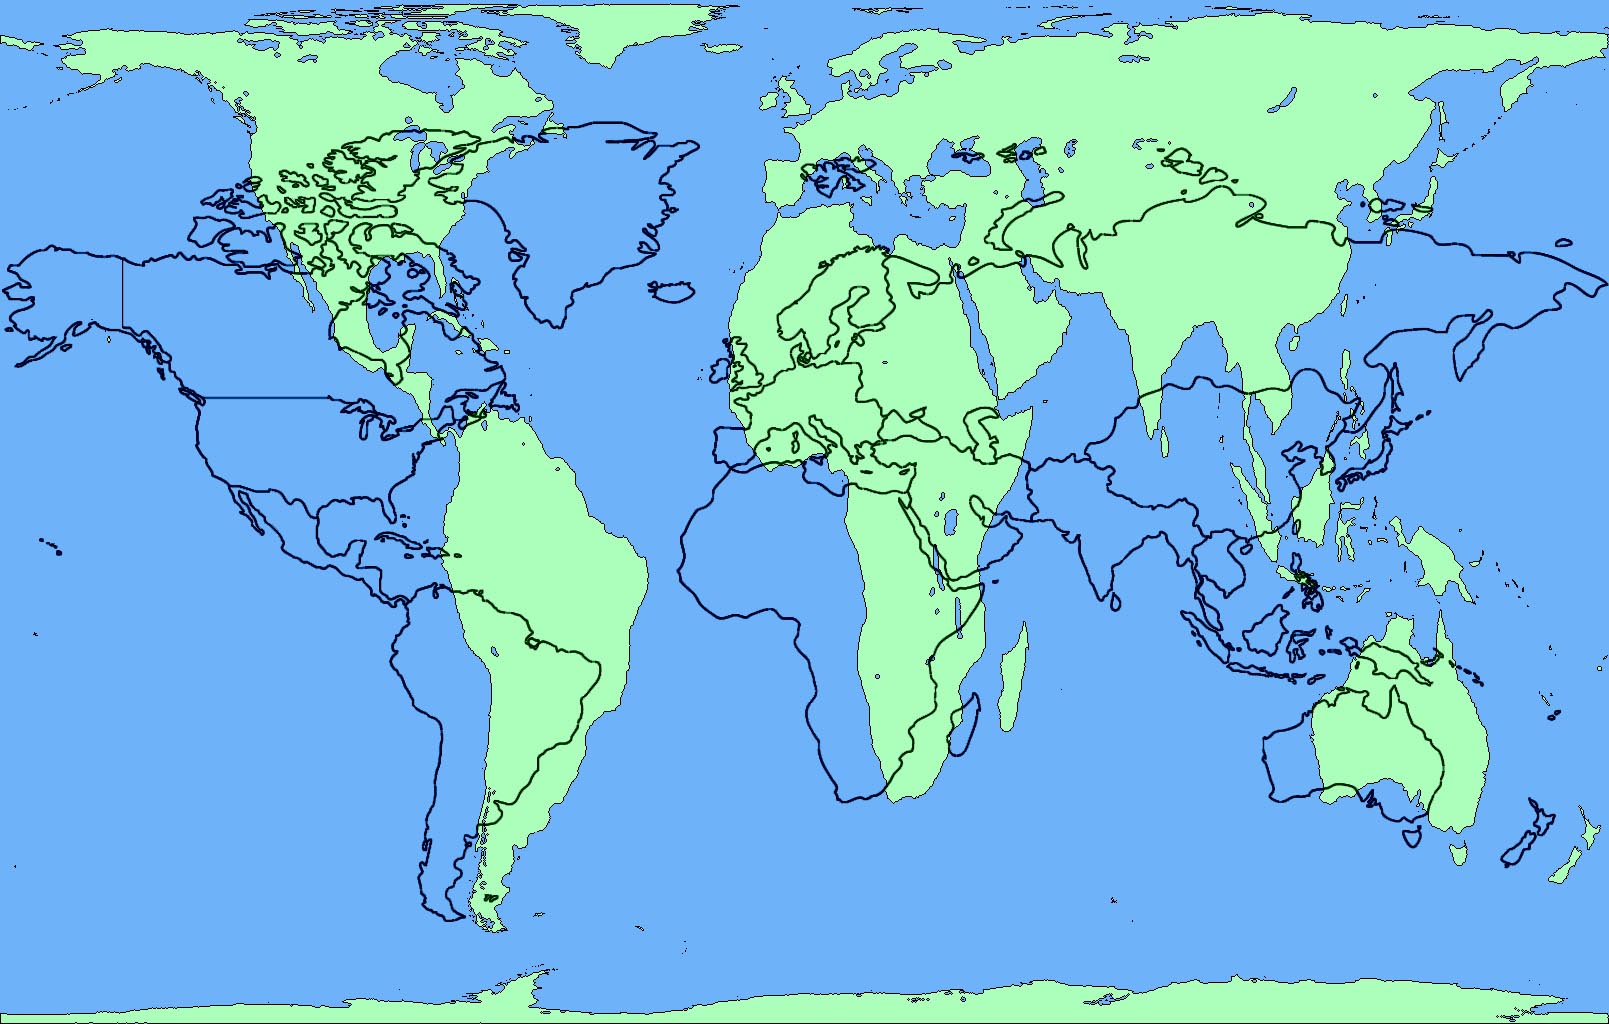 Peters Projection Comparison World Map 